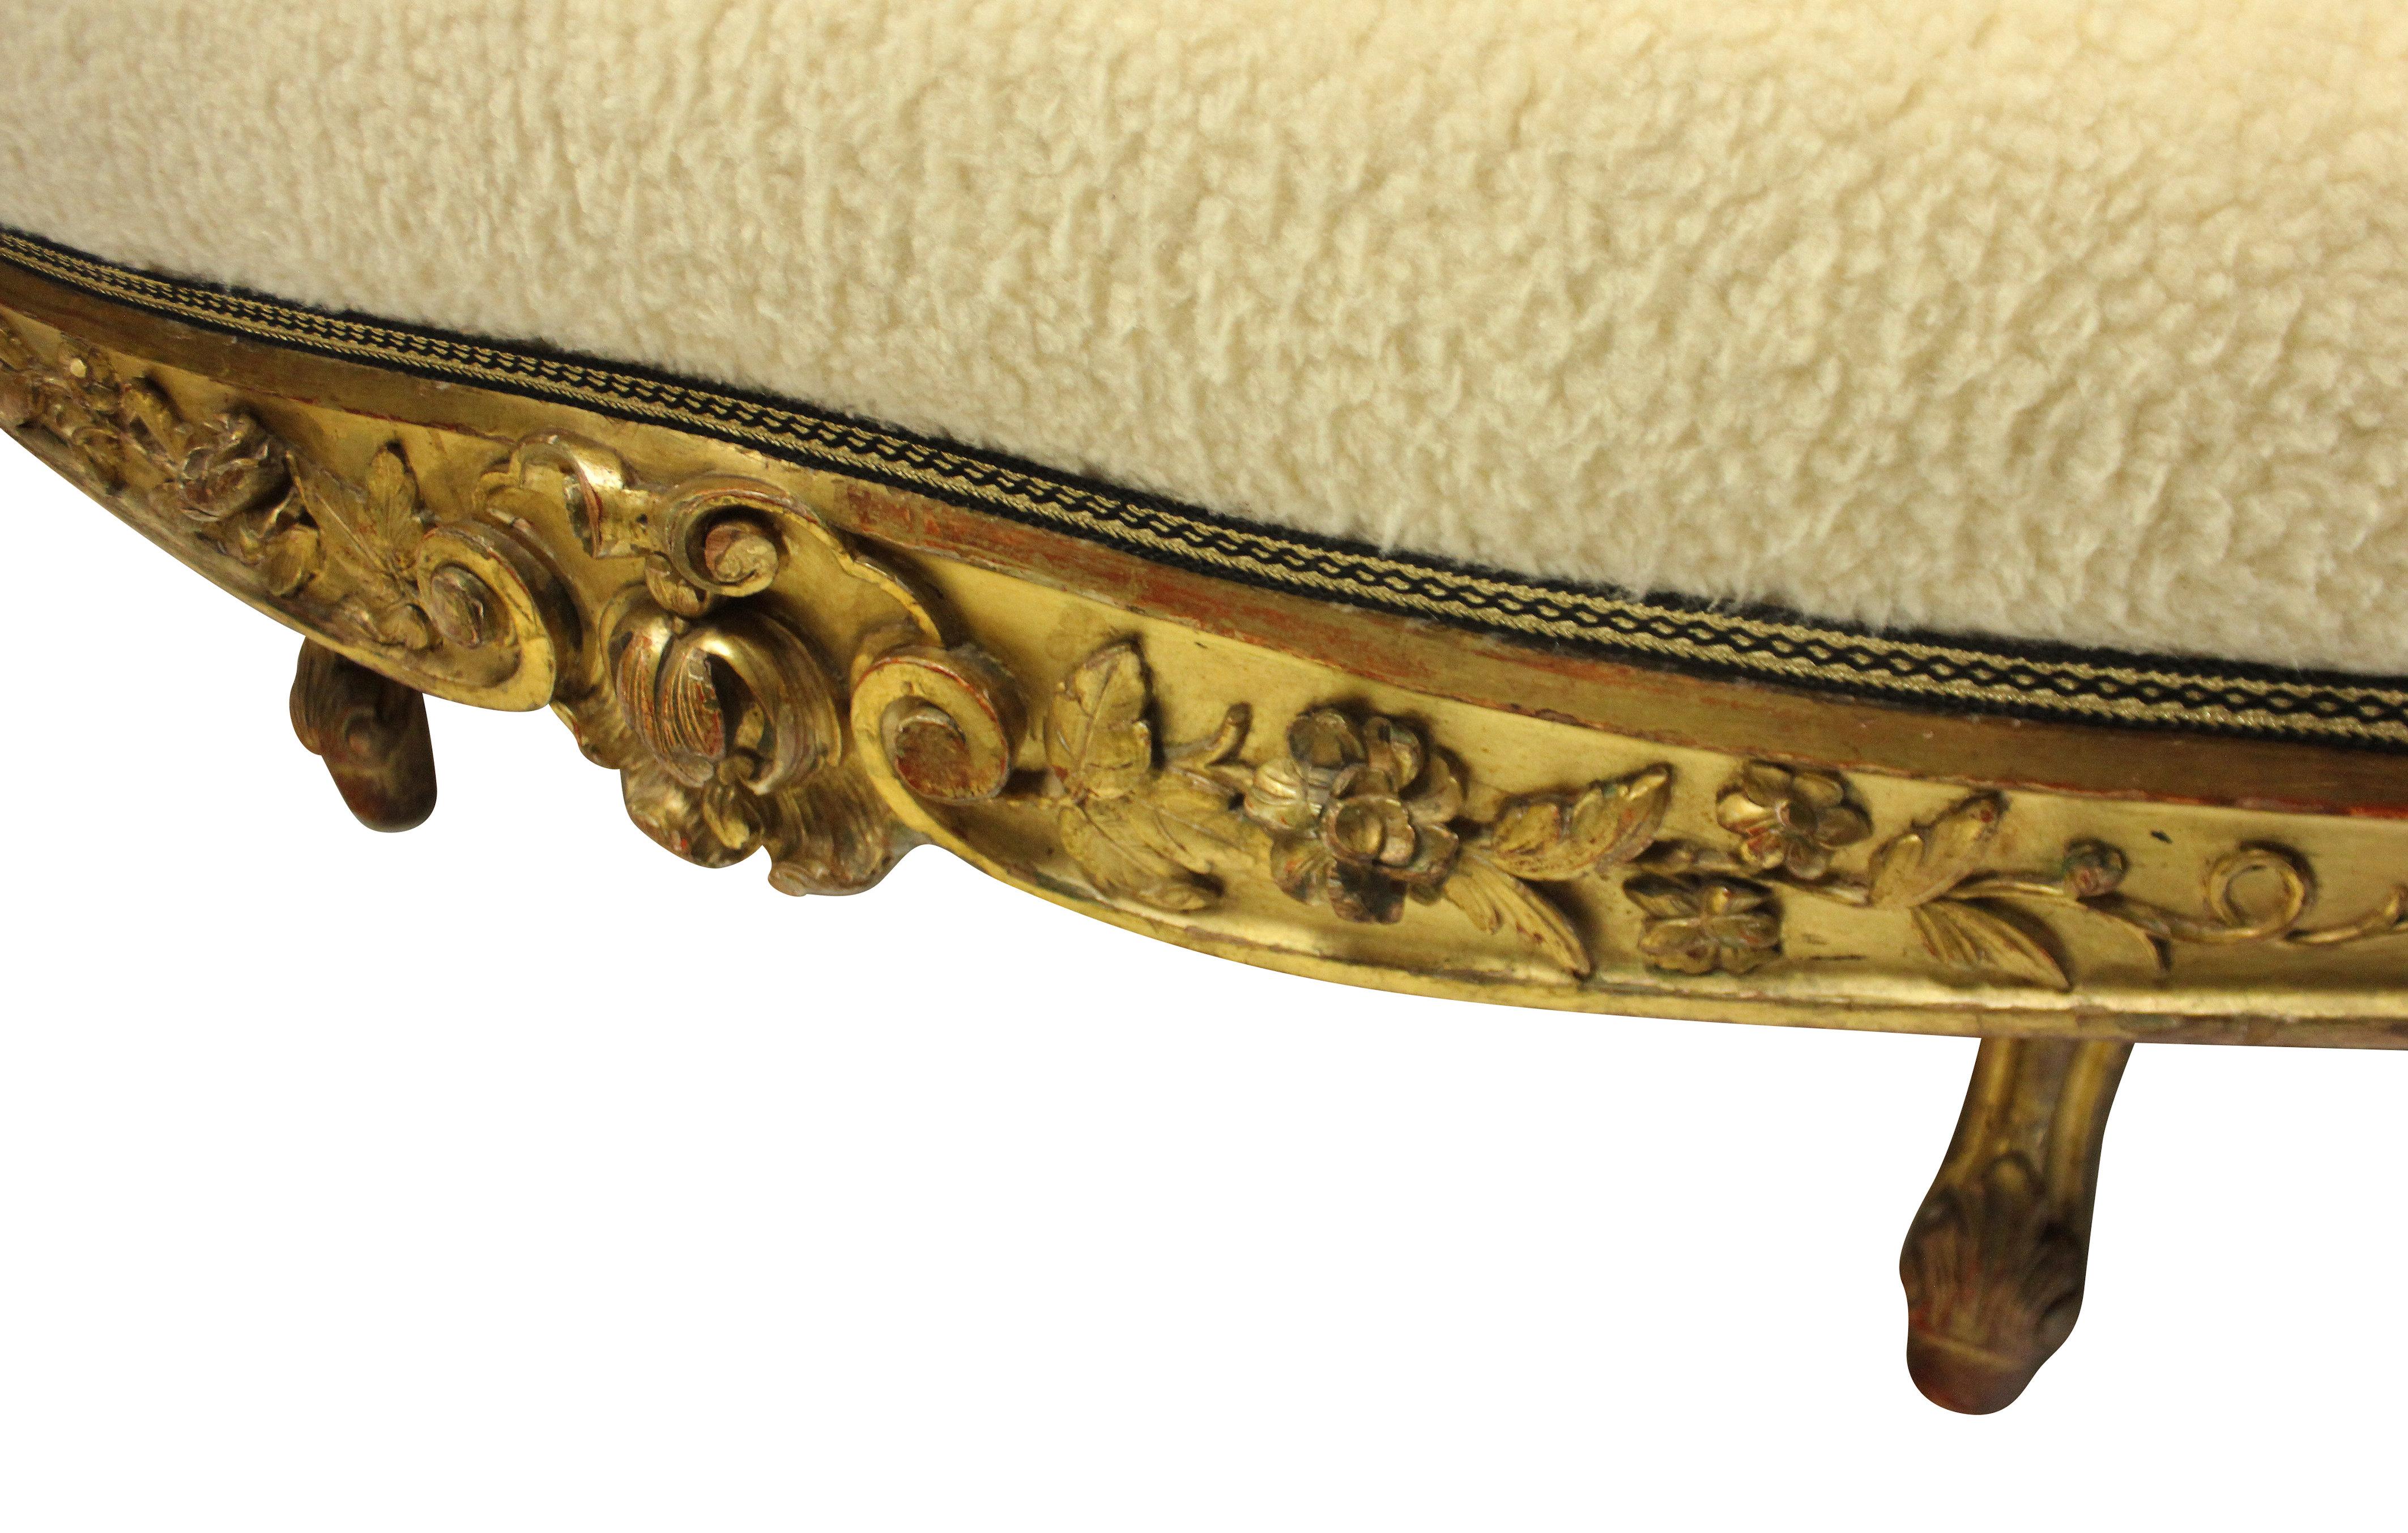 A large English carved and water gilded settee of fine quality, with shell crest, scrolled corners and decorated with English roses and foliage throughout. Newly upholstered in faux lambswool with a black and gold trim.